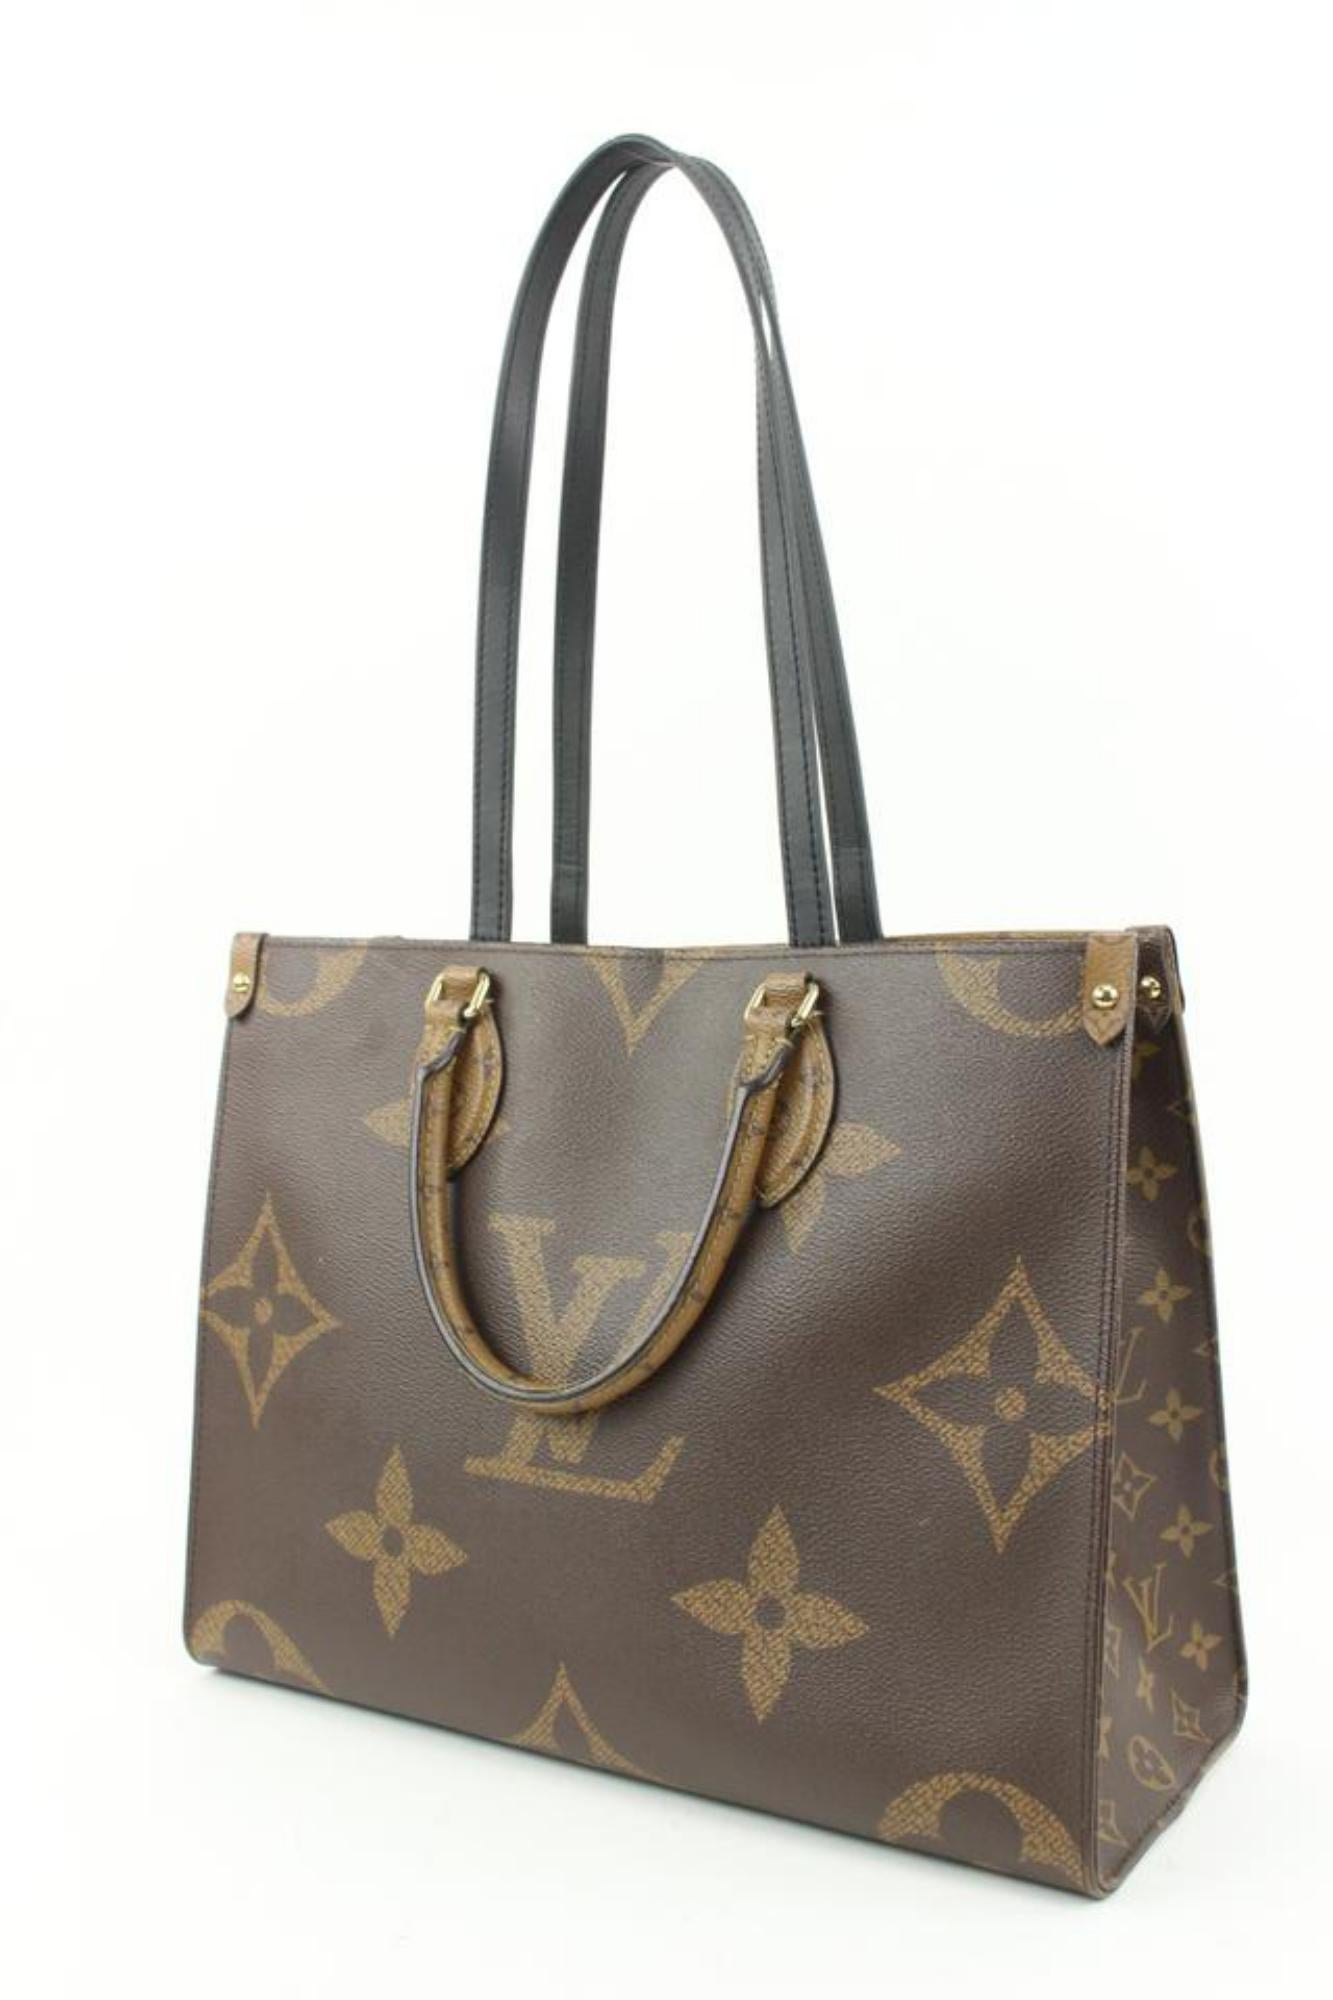 Louis Vuitton Monogram Reverse Onthego MM 2way Tote Bag s210lv58
Date Code/Serial Number: FL2280
Made In: France
Measurements: Length:  13.5